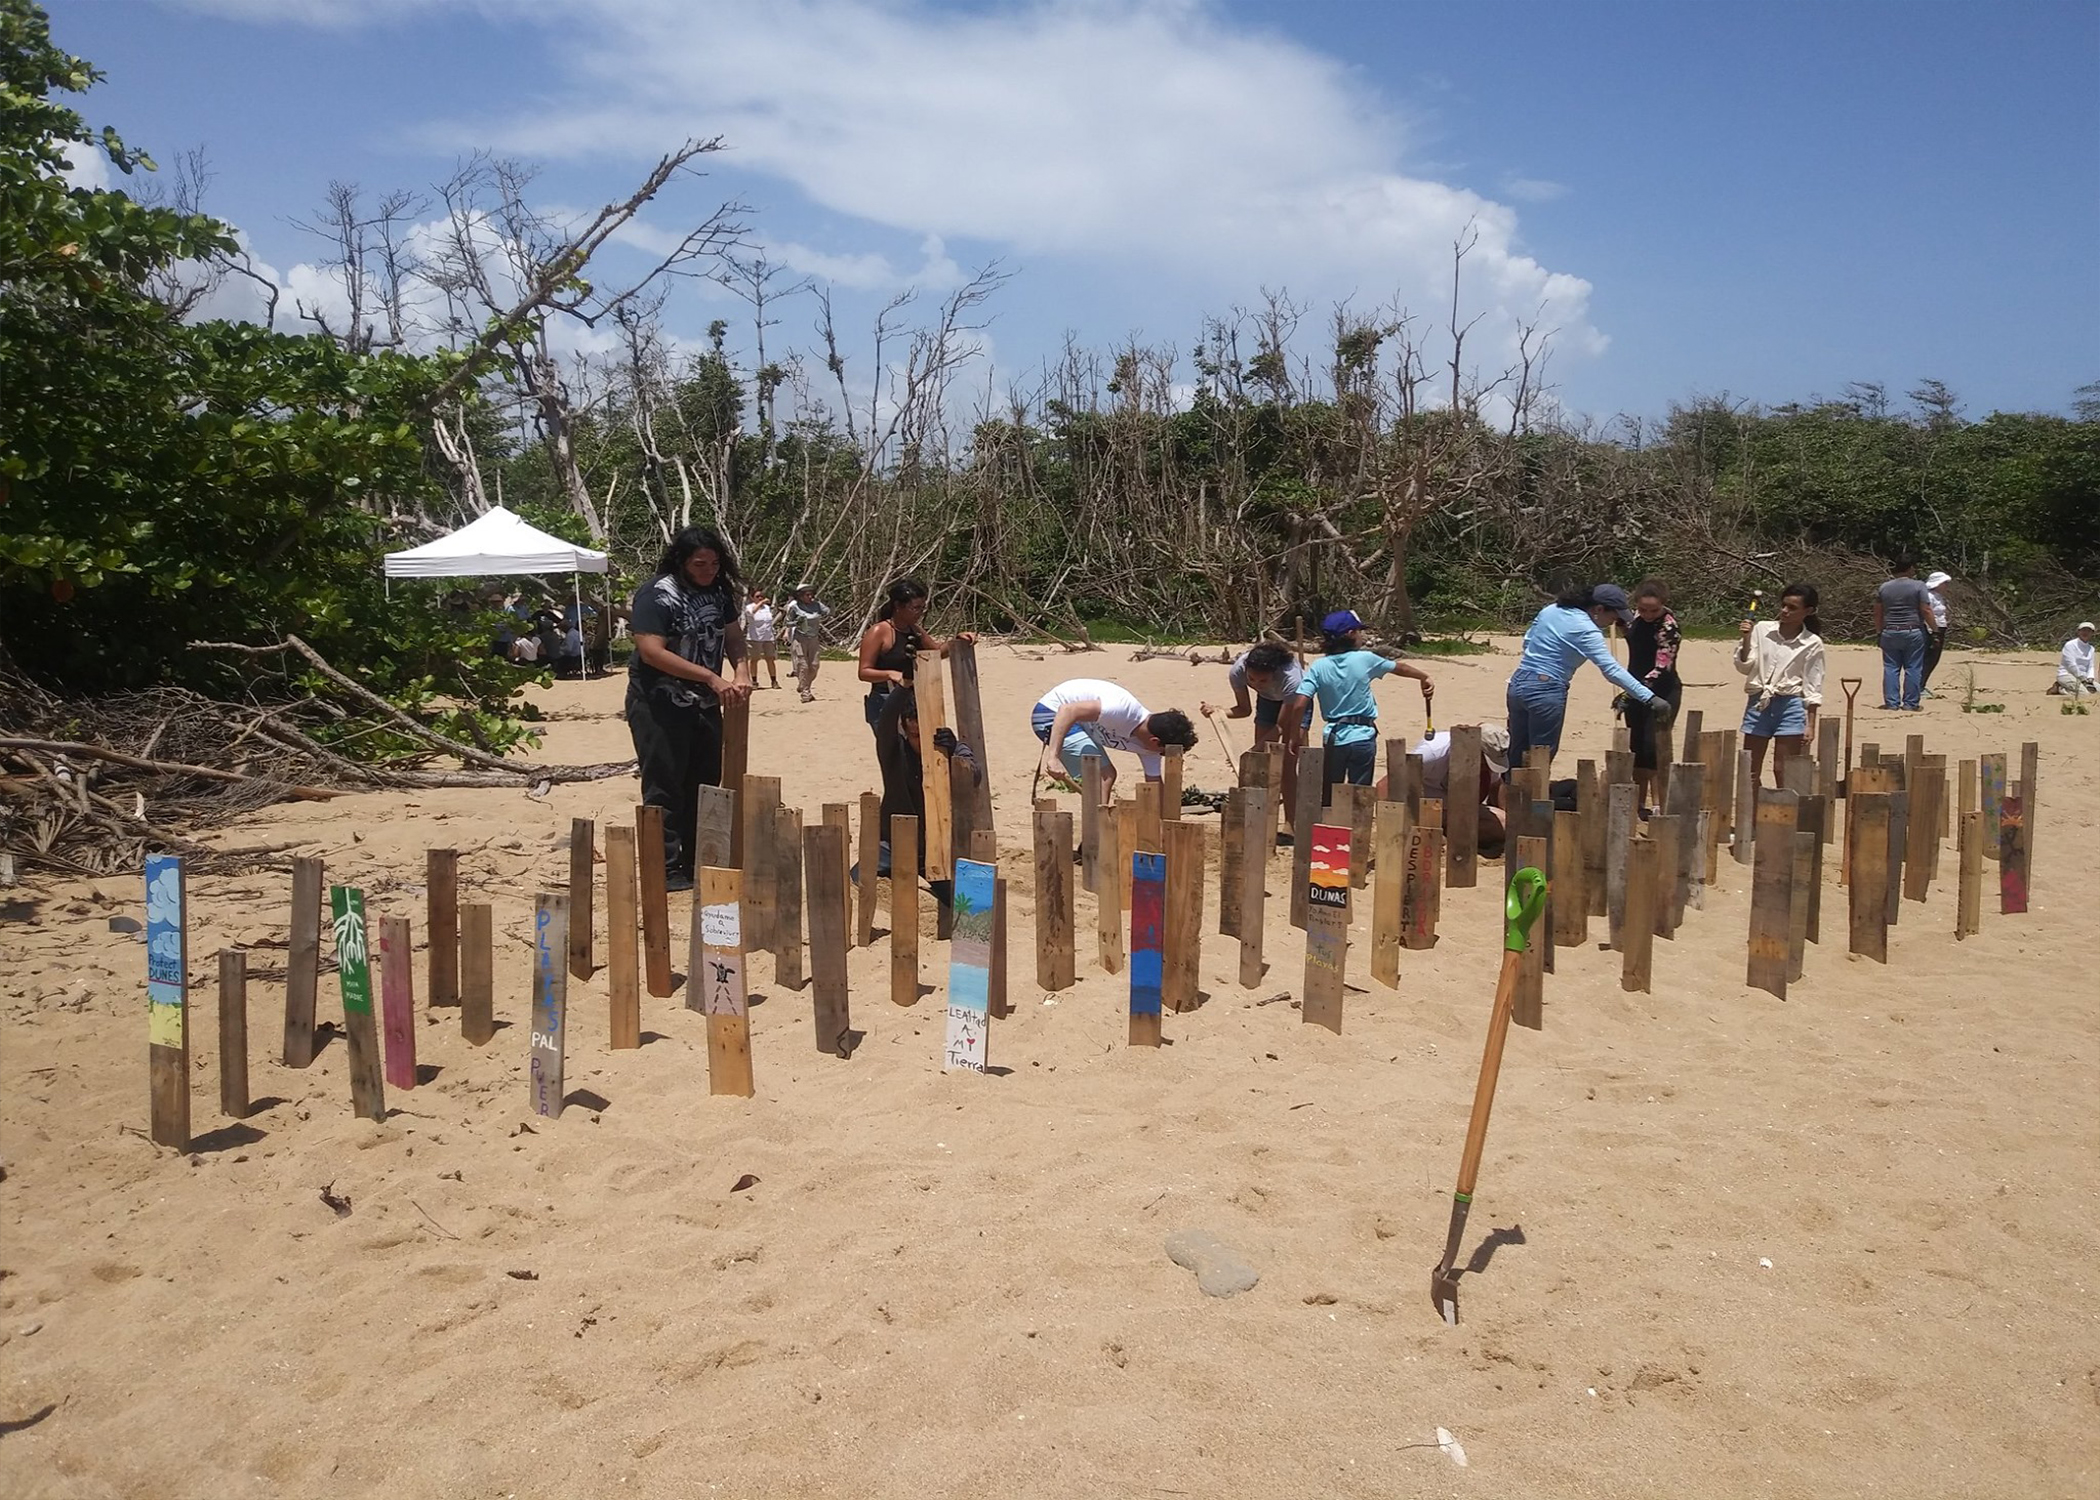 Volunteers installing biomimicry sand-trapping devices to increase dune height for National Fish And Wildlife Foundation grant.